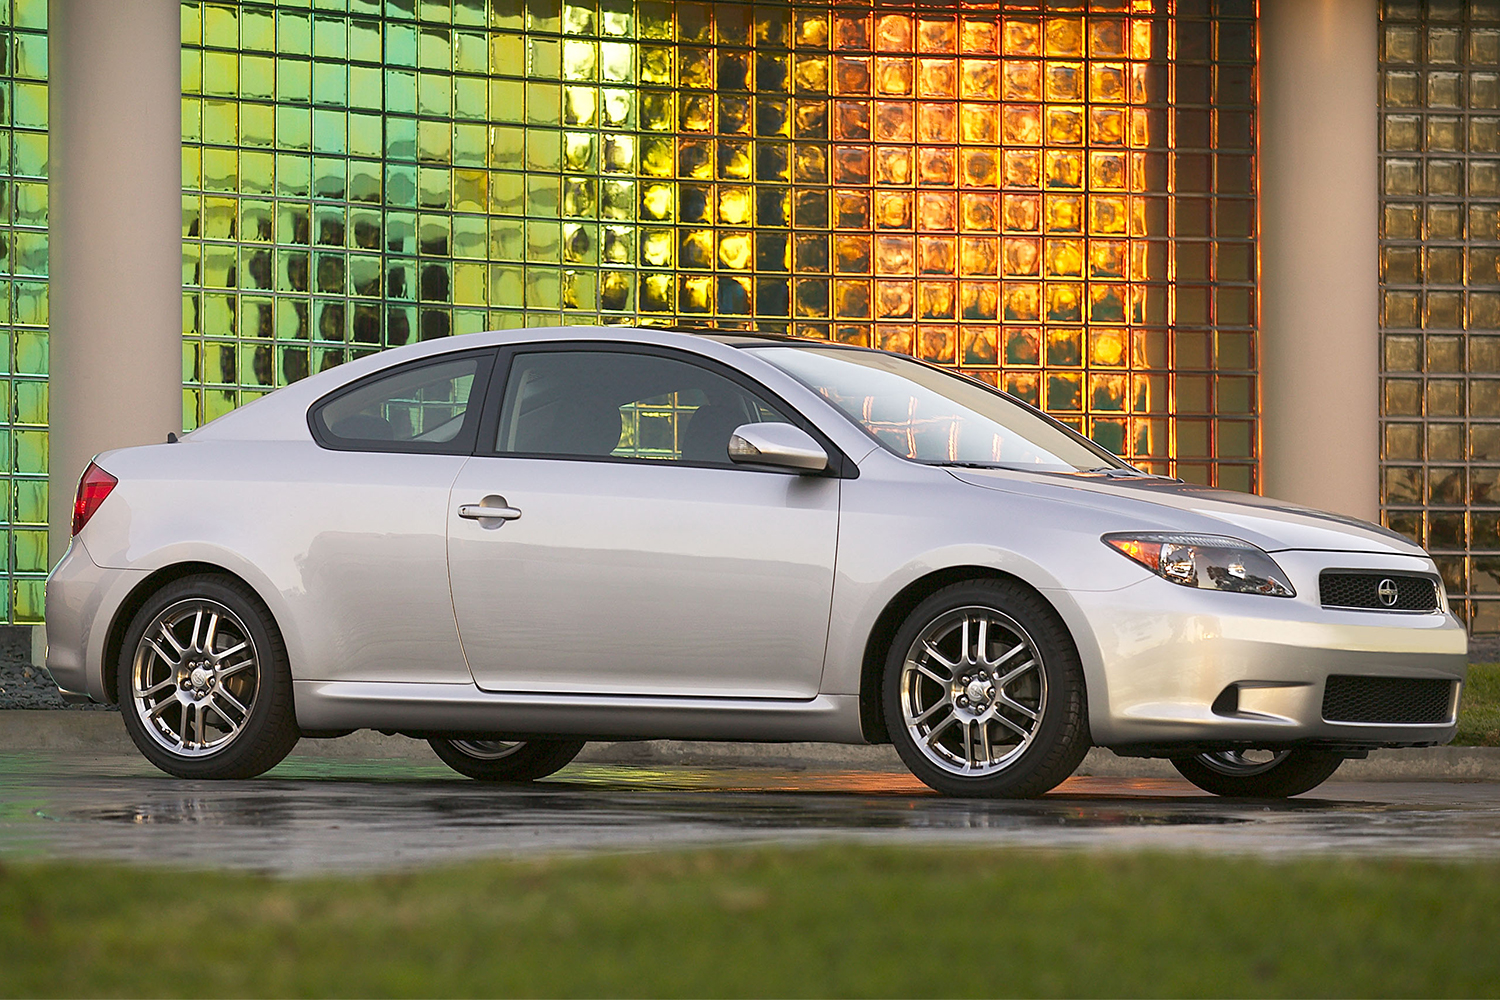 The 2005 Scion tC compact car. Here the coupe is pictured sitting in front of a colored glass wall.